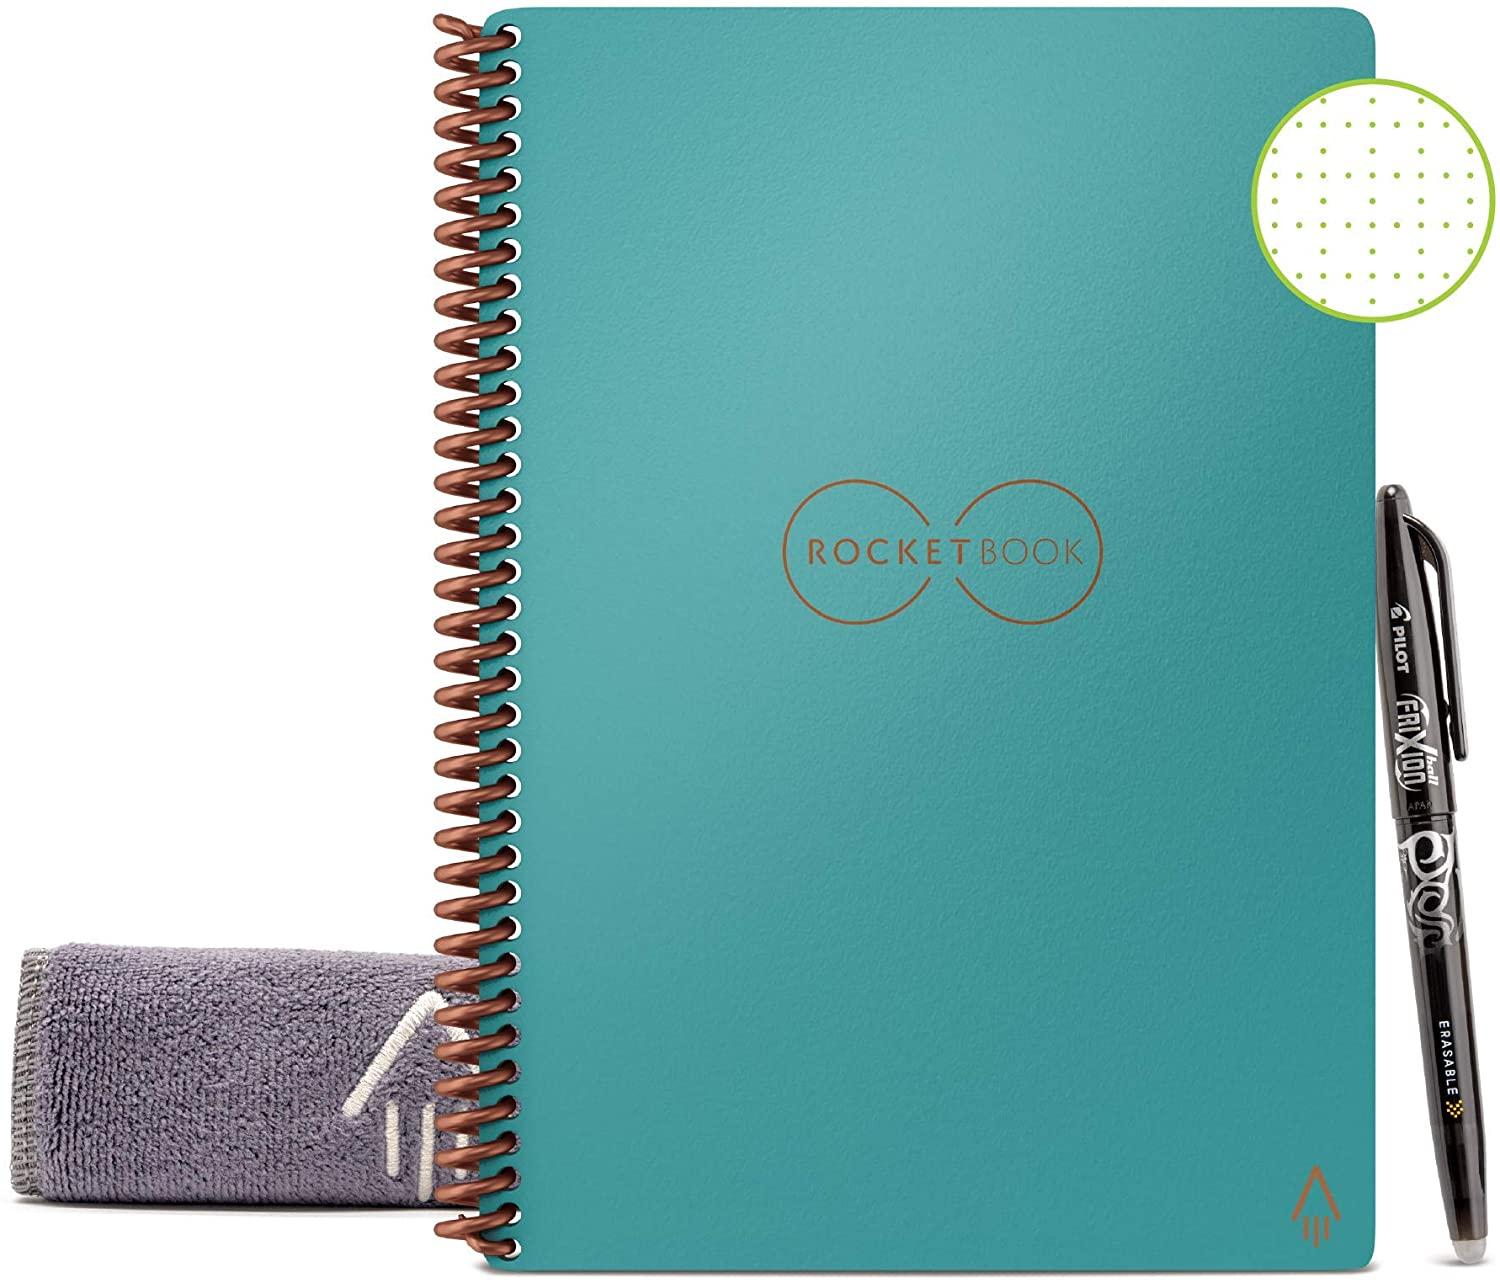 Rocketbook Smart Reusable Notebook for $15.89 Shipped